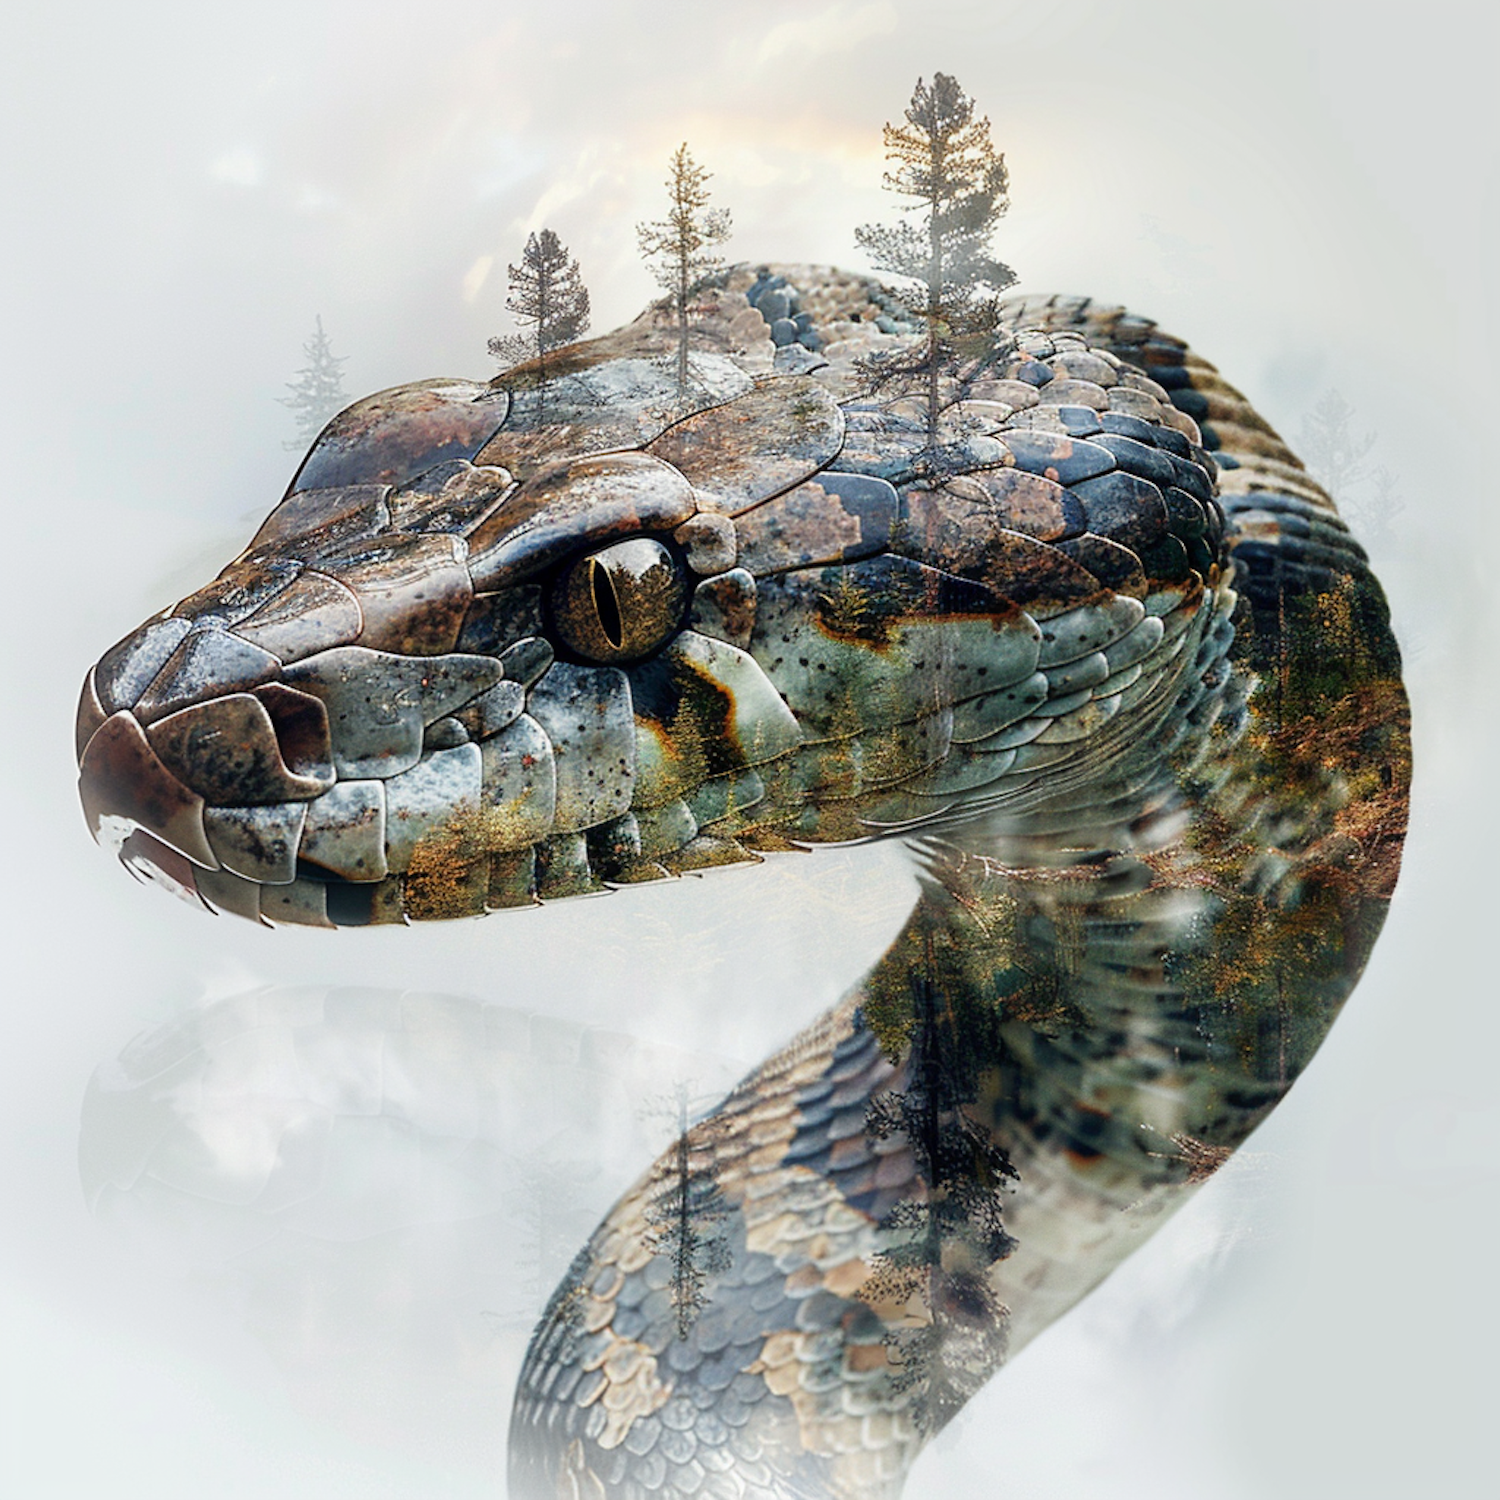 Python in the Misty Forest - Double Exposure